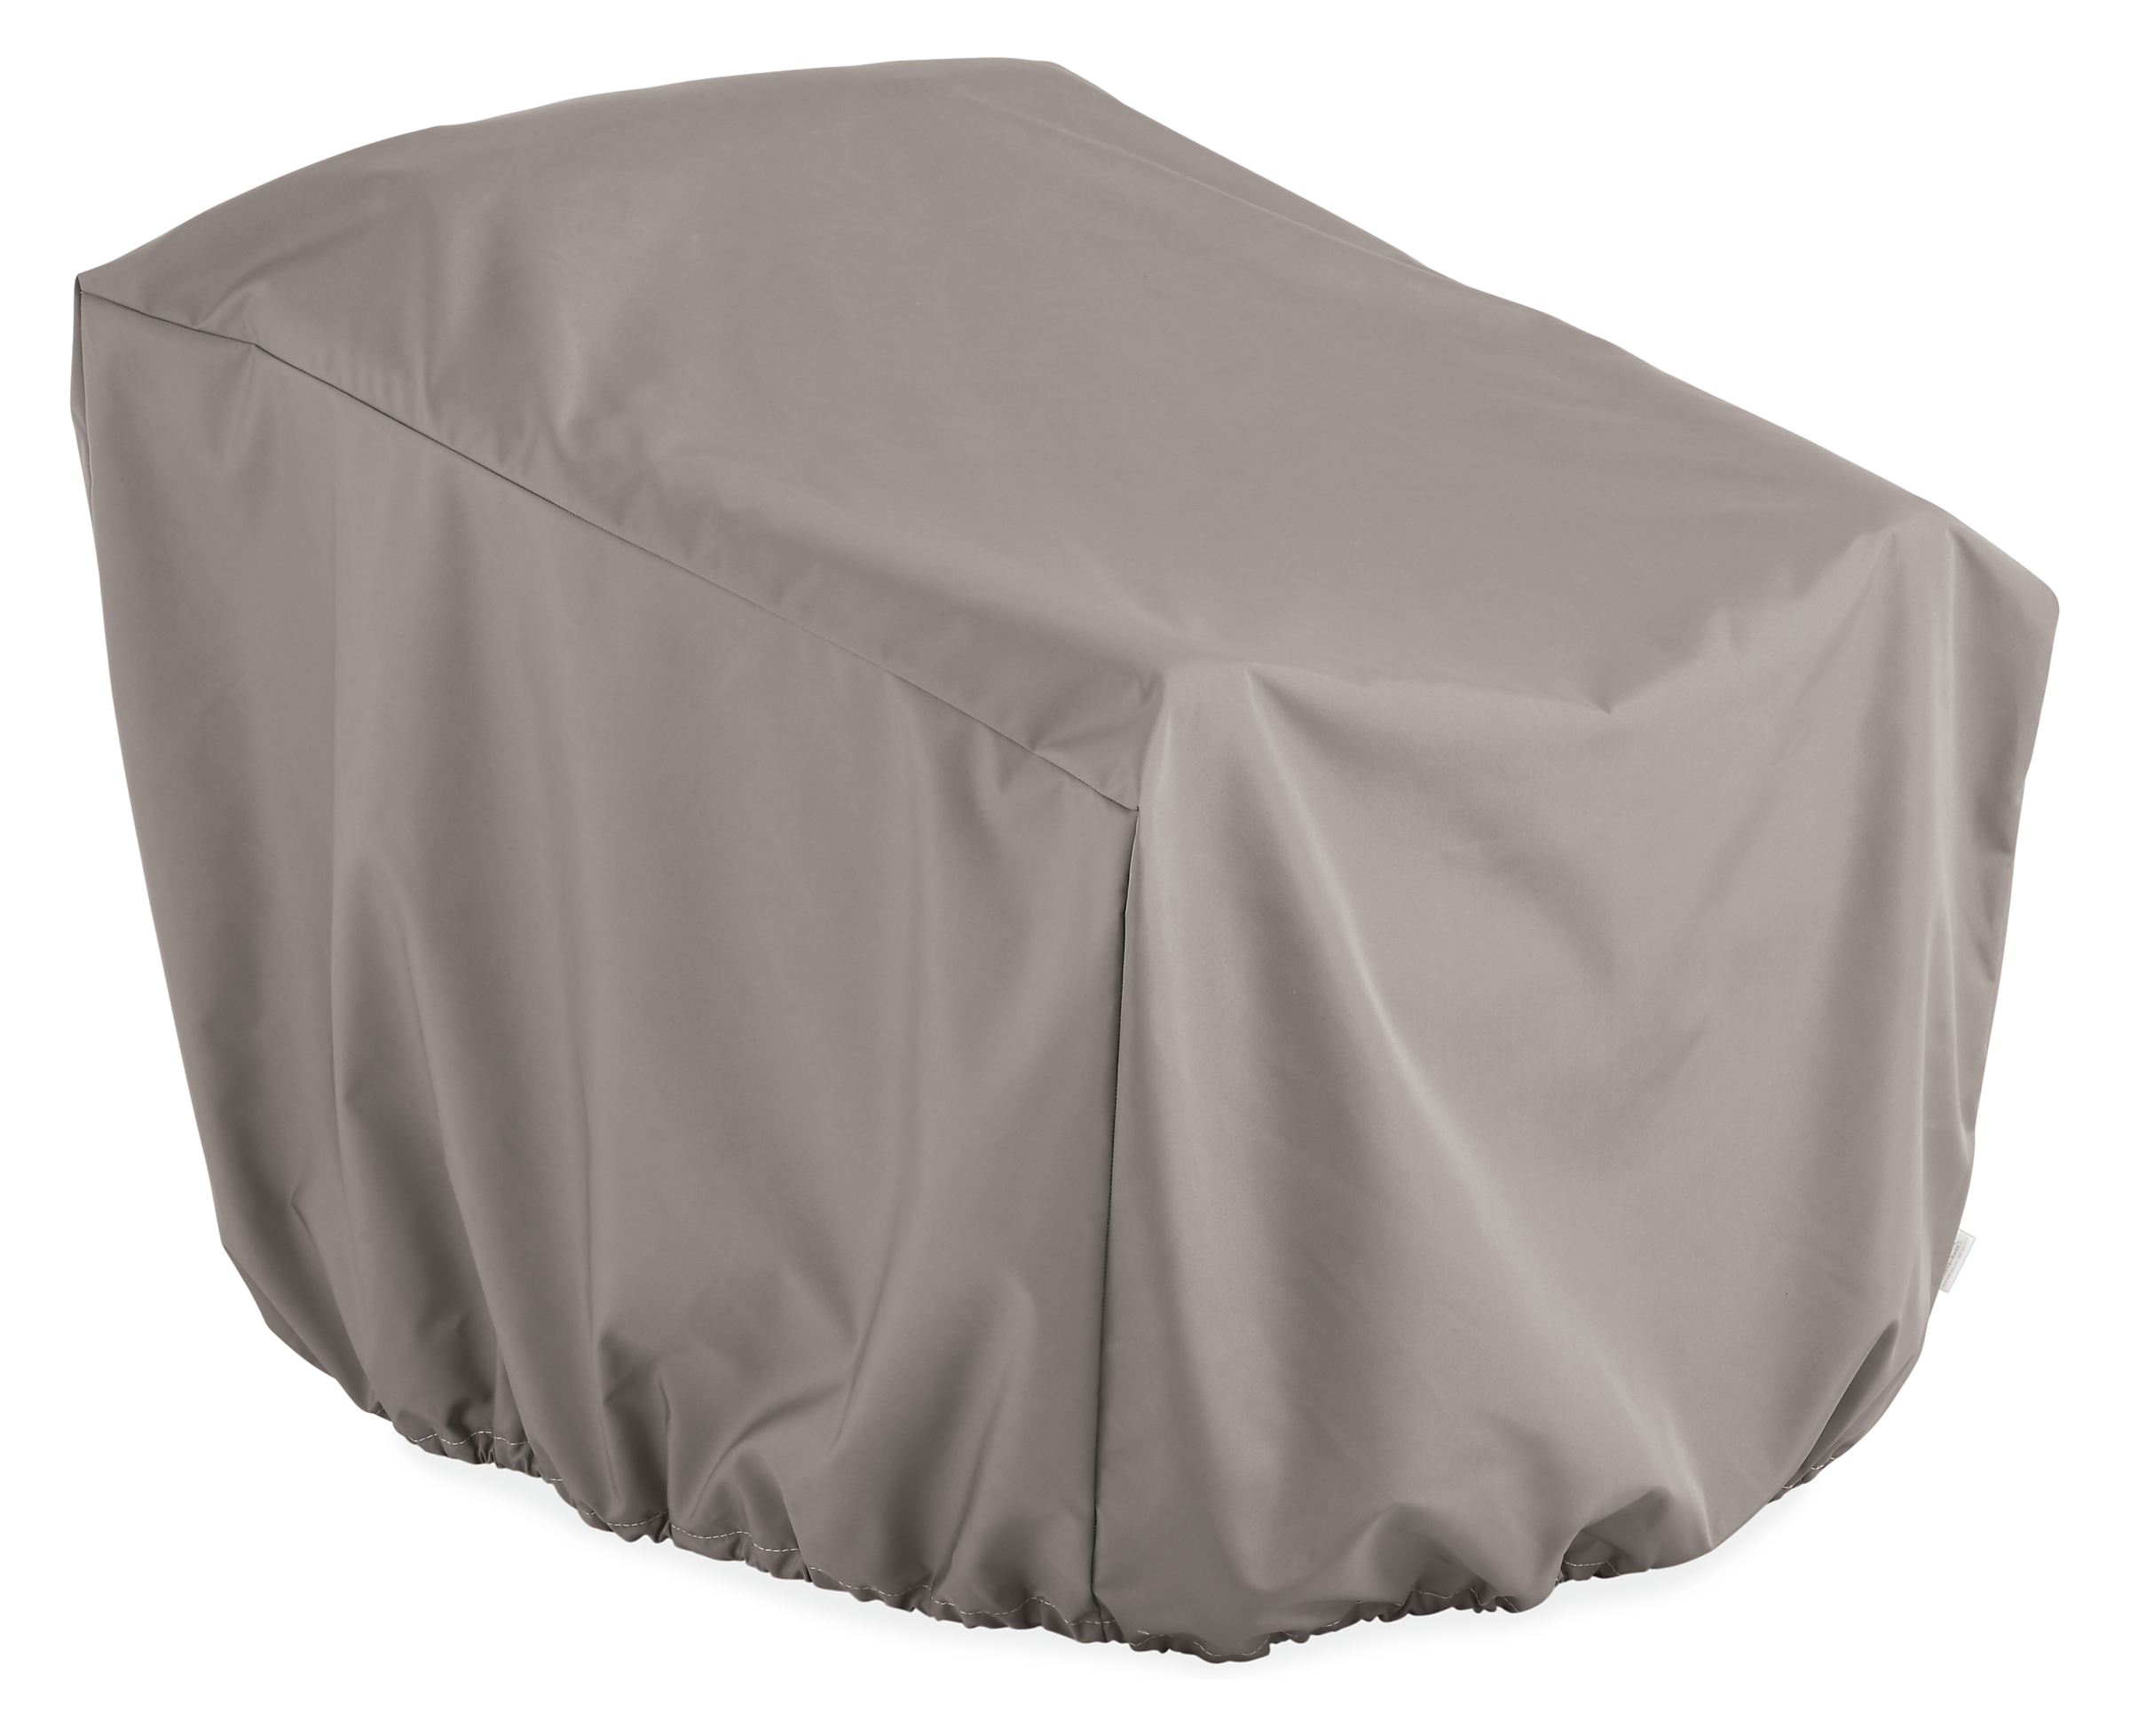 Outdoor Cover for Chair 37w 35d 26h with Drawstring